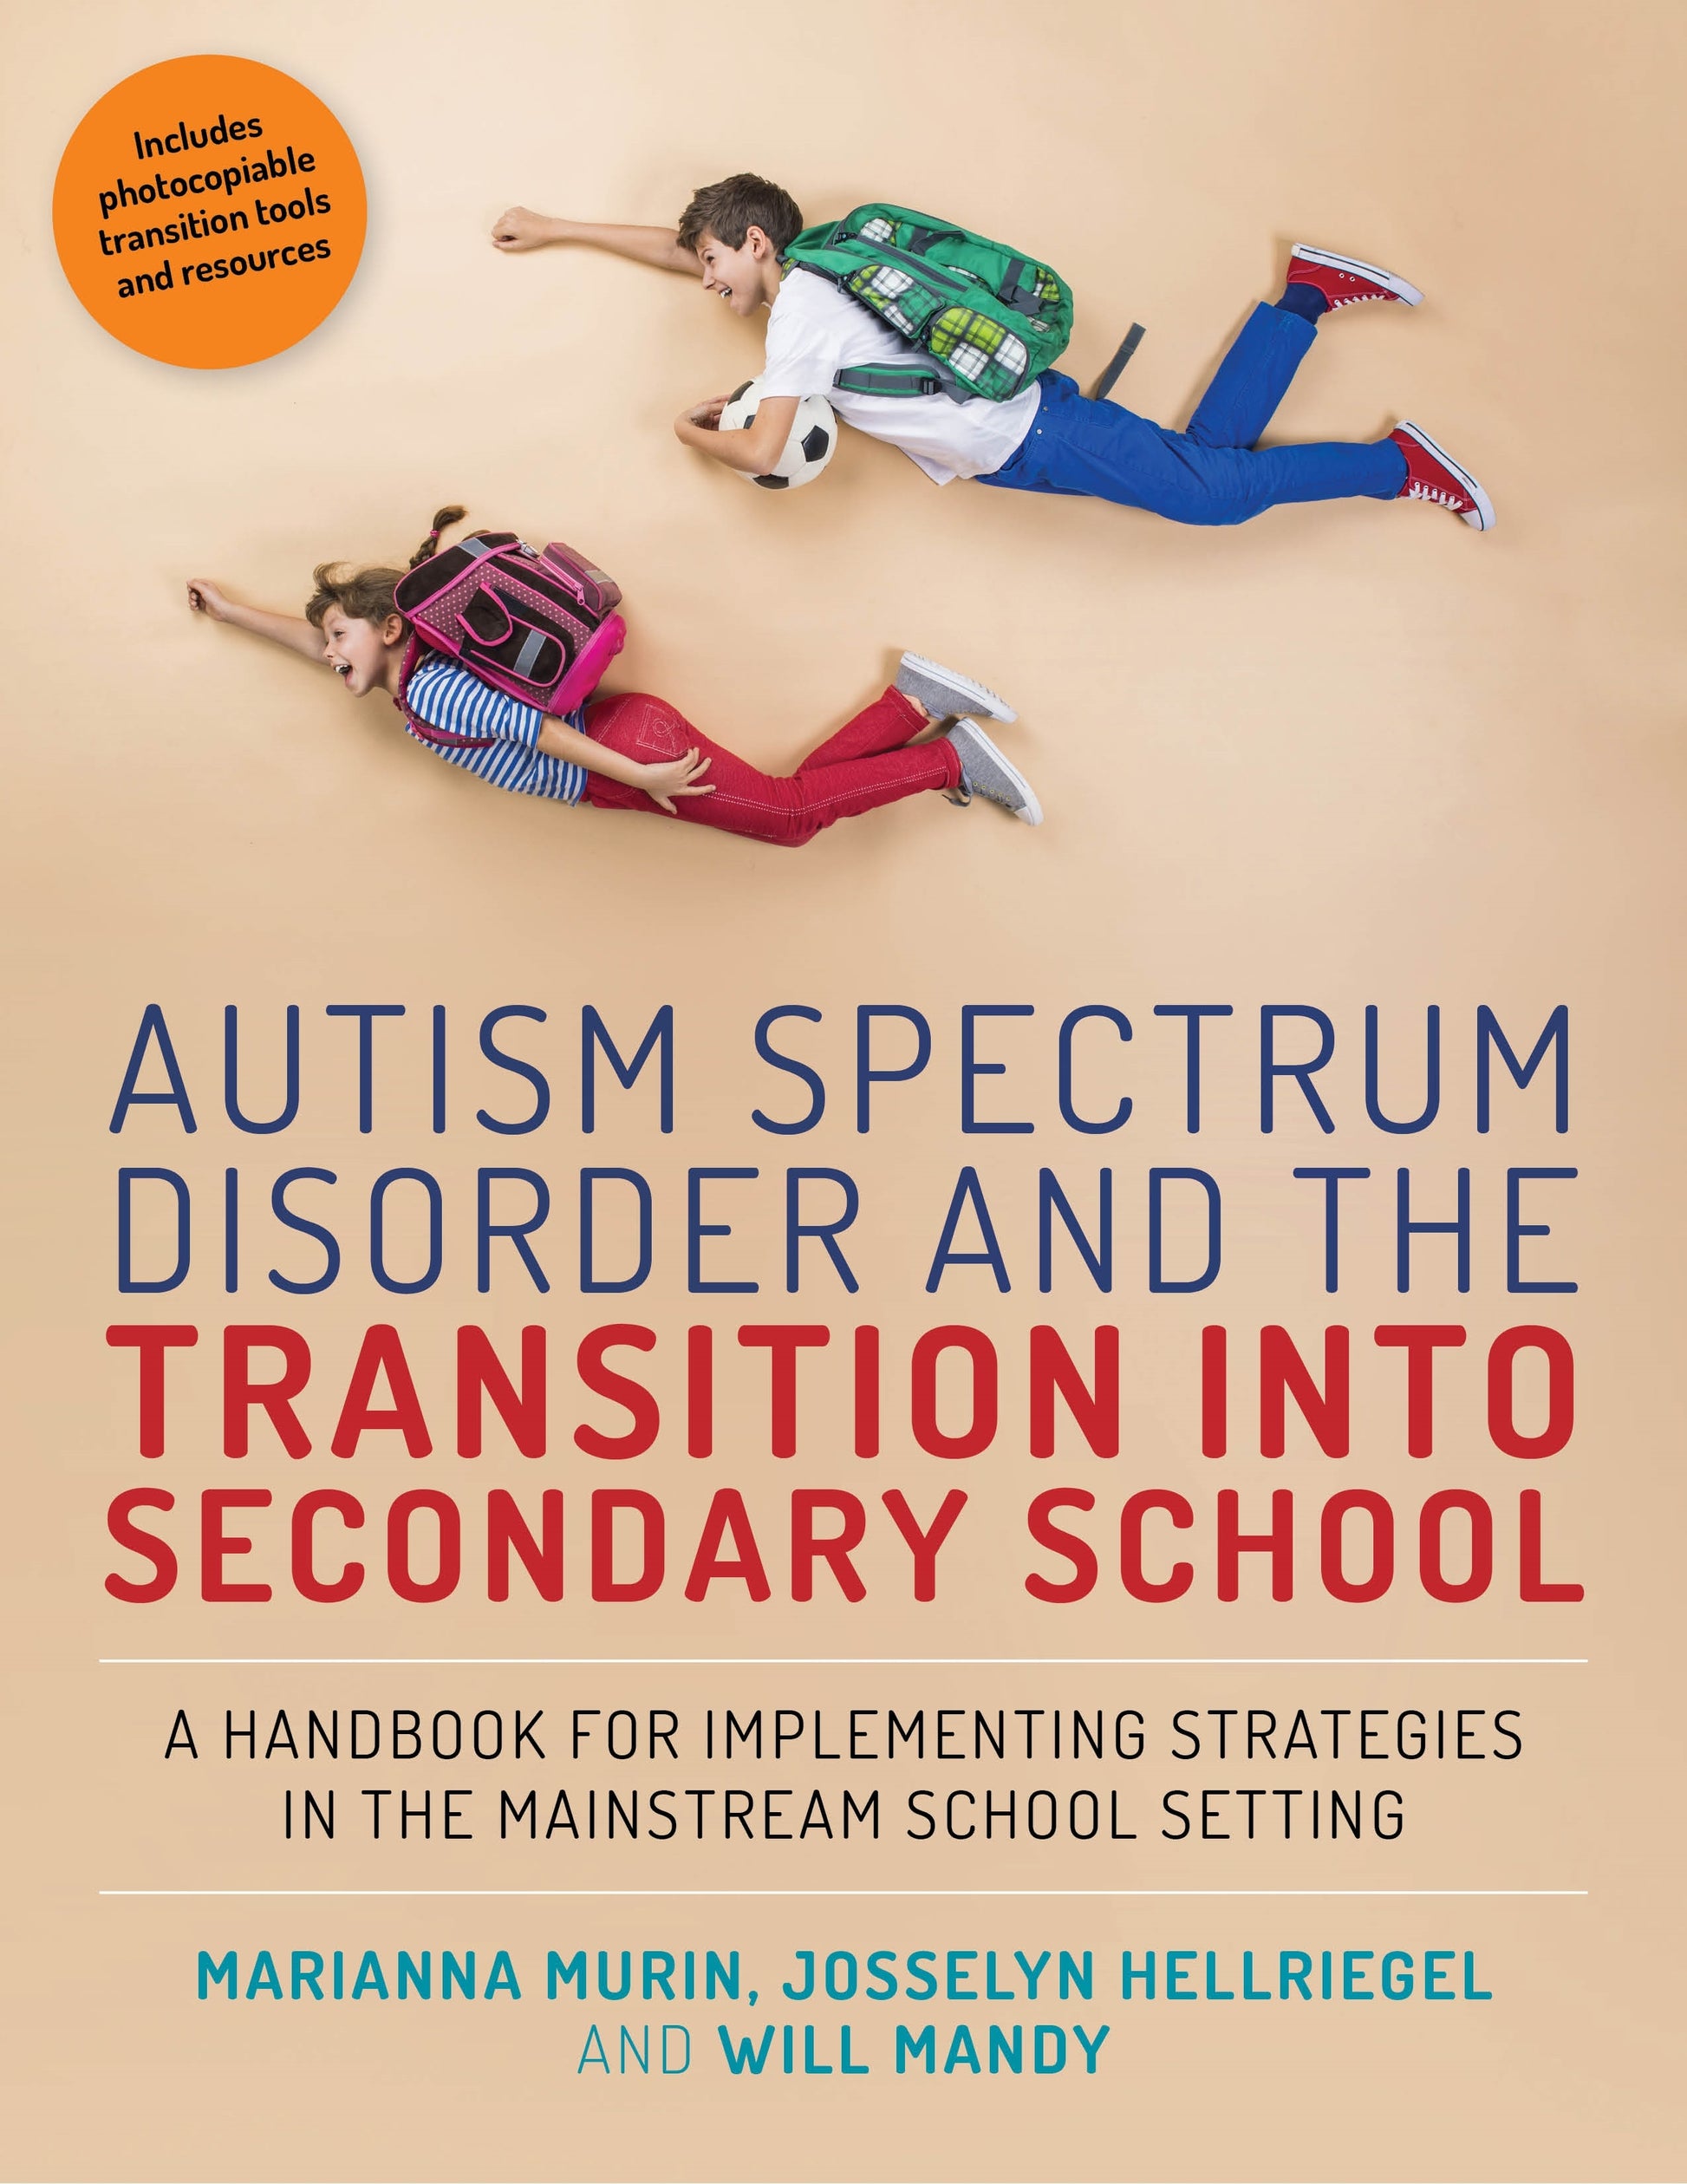 Autism Spectrum Disorder and the Transition into Secondary School by Marianna Murin, Josselyn Hellriegel, Will Mandy